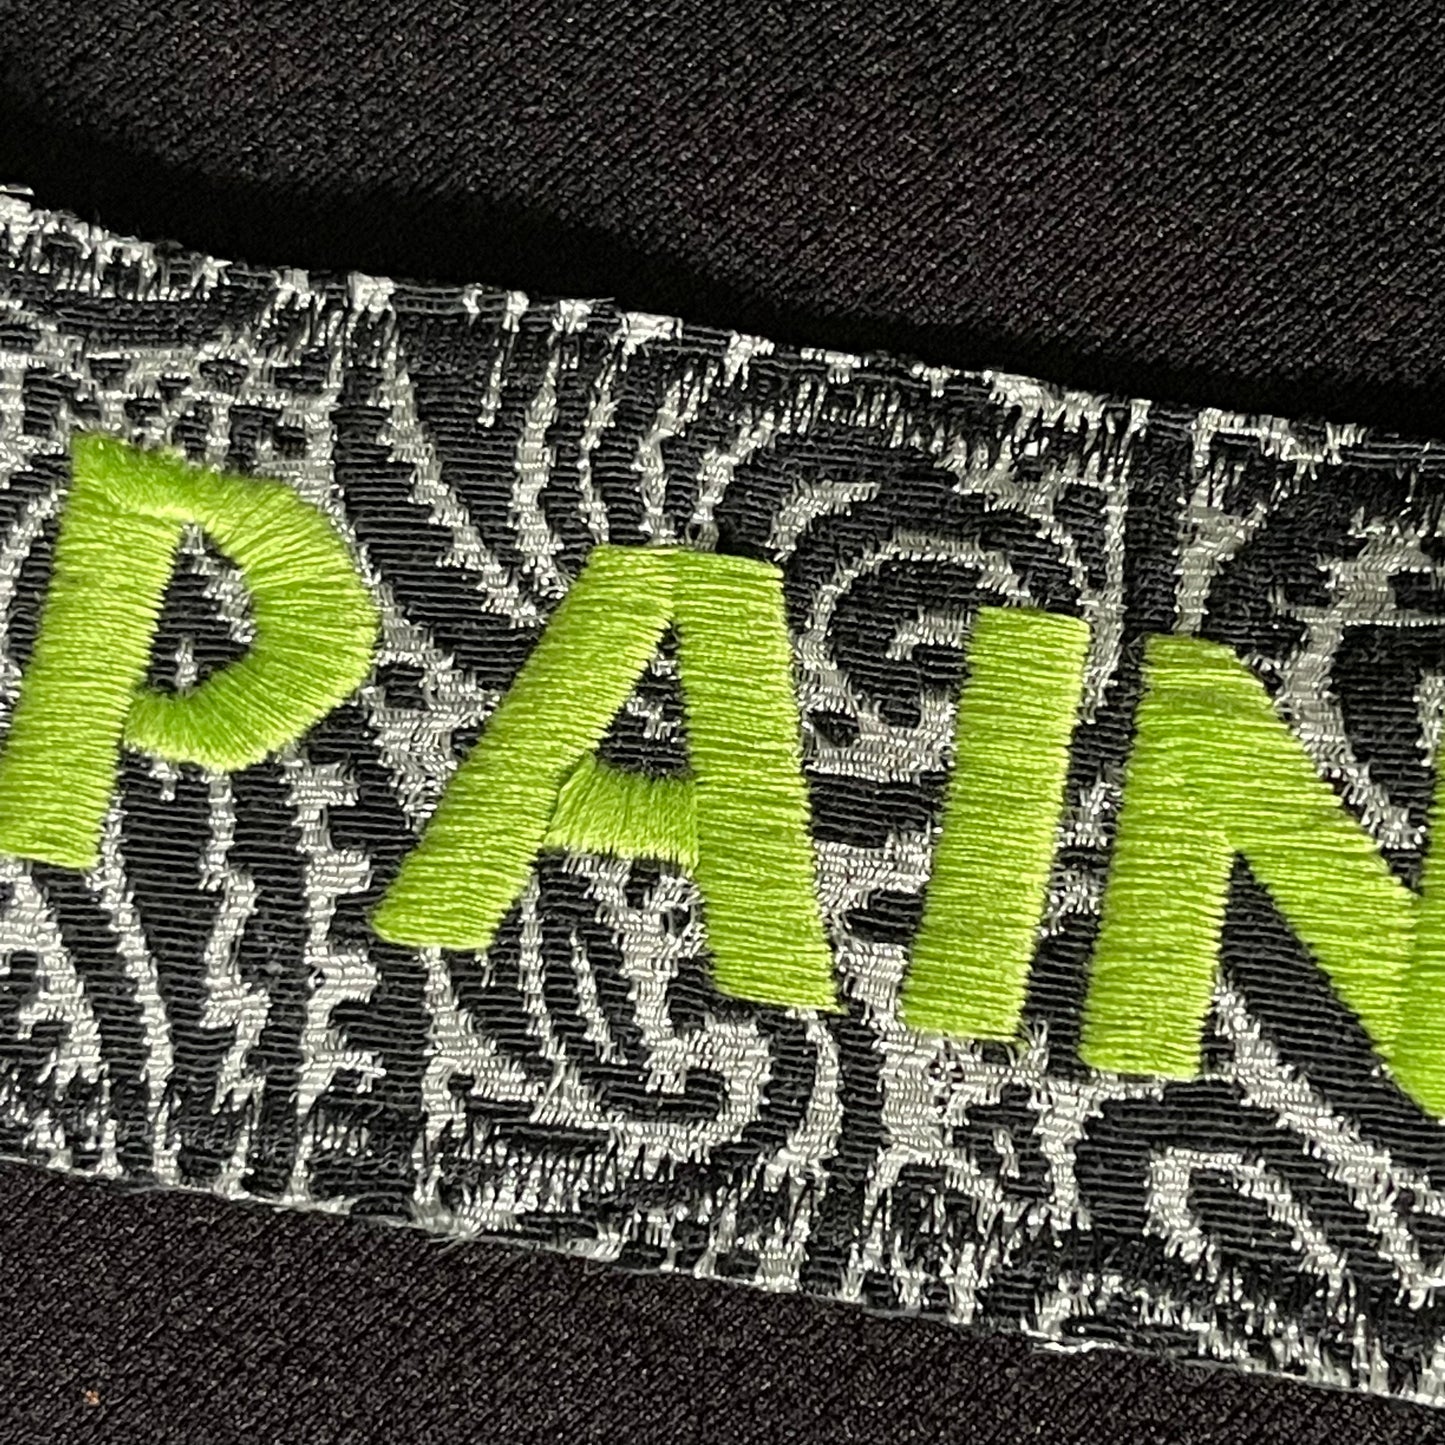 Pain Embroidered Patch